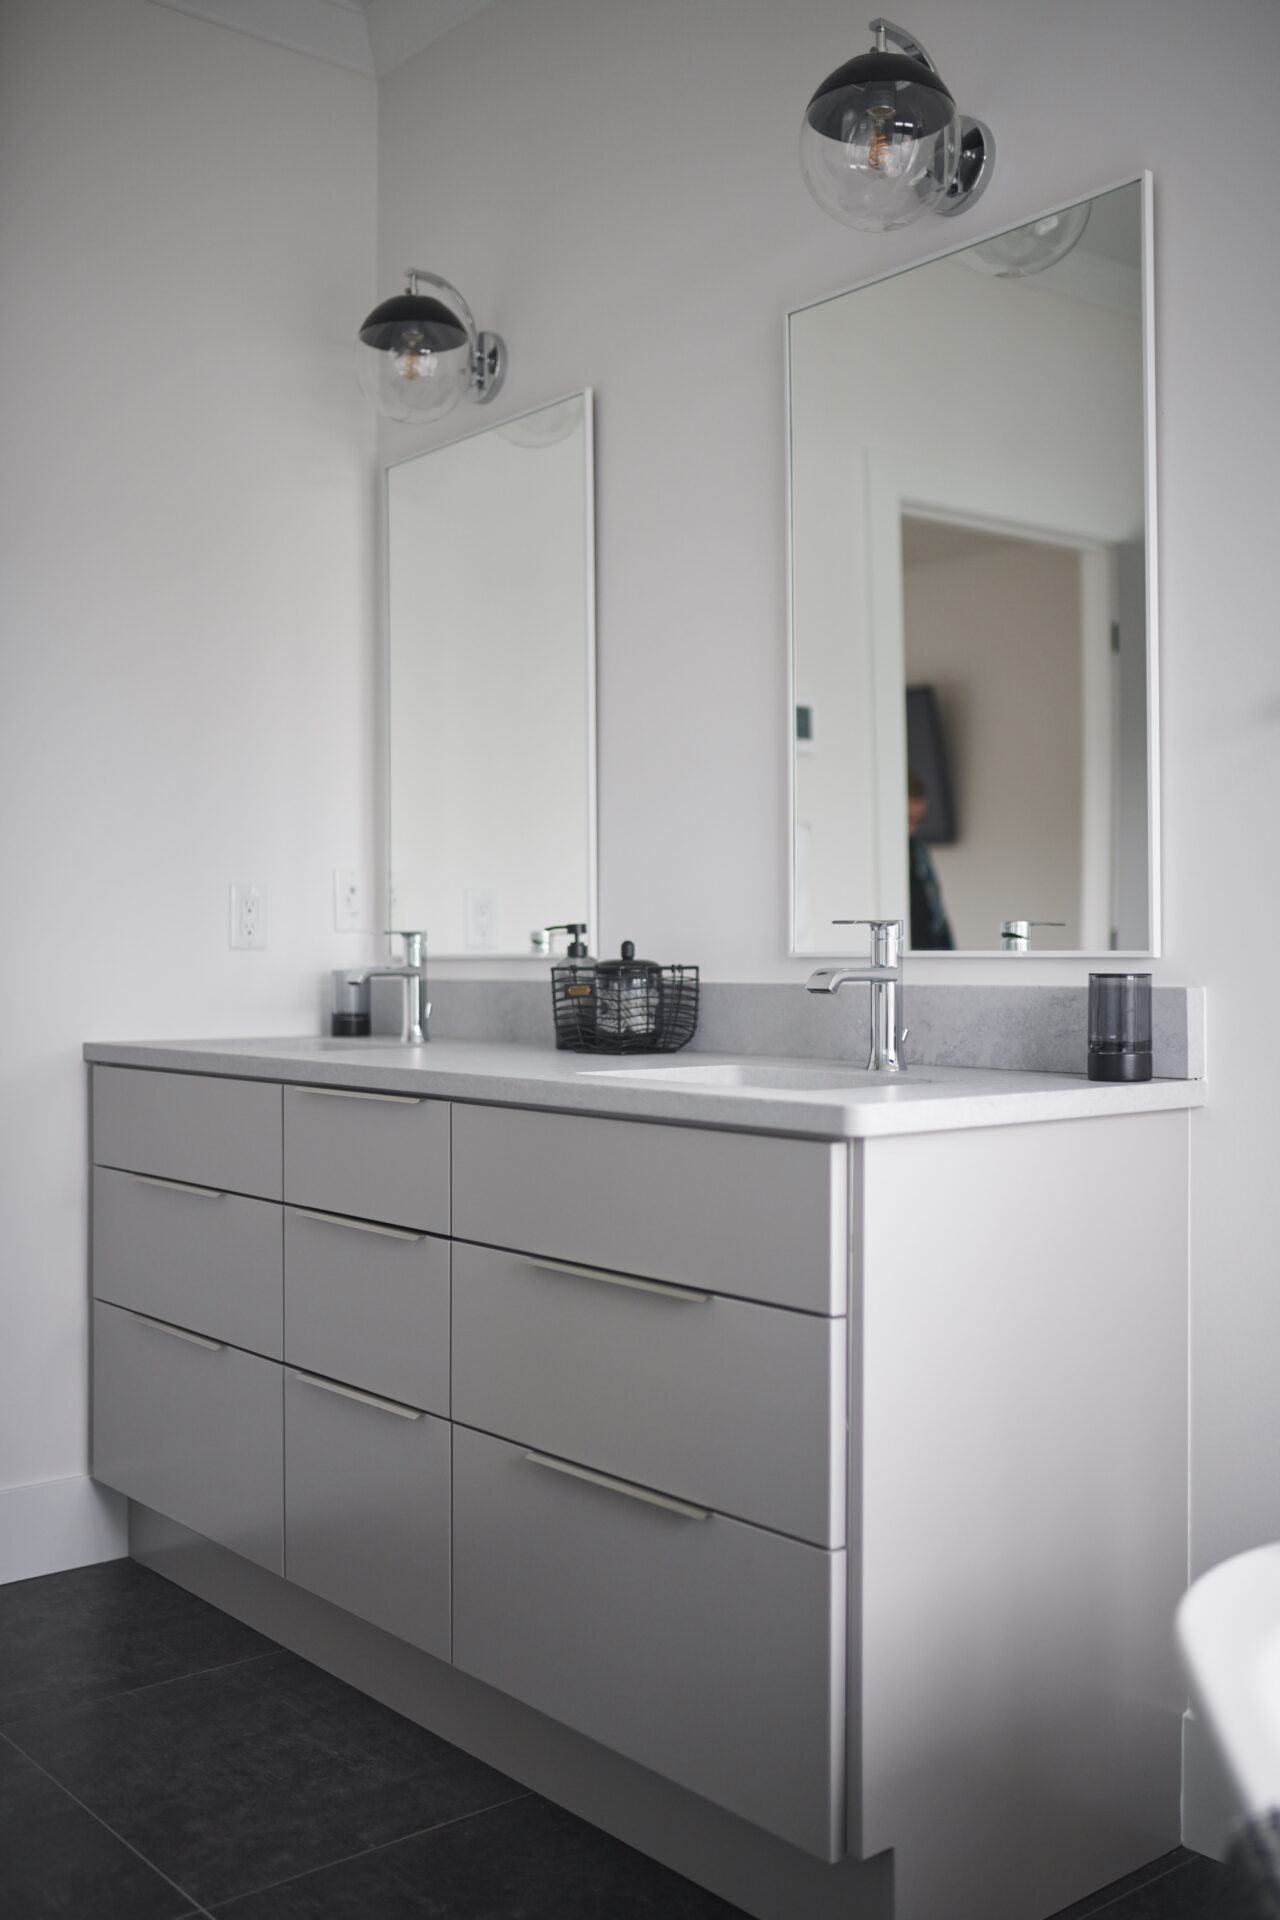 This image shows a modern bathroom vanity with a large mirror, sleek drawers, and minimalistic decor under bright, clear glass sphere wall lights.